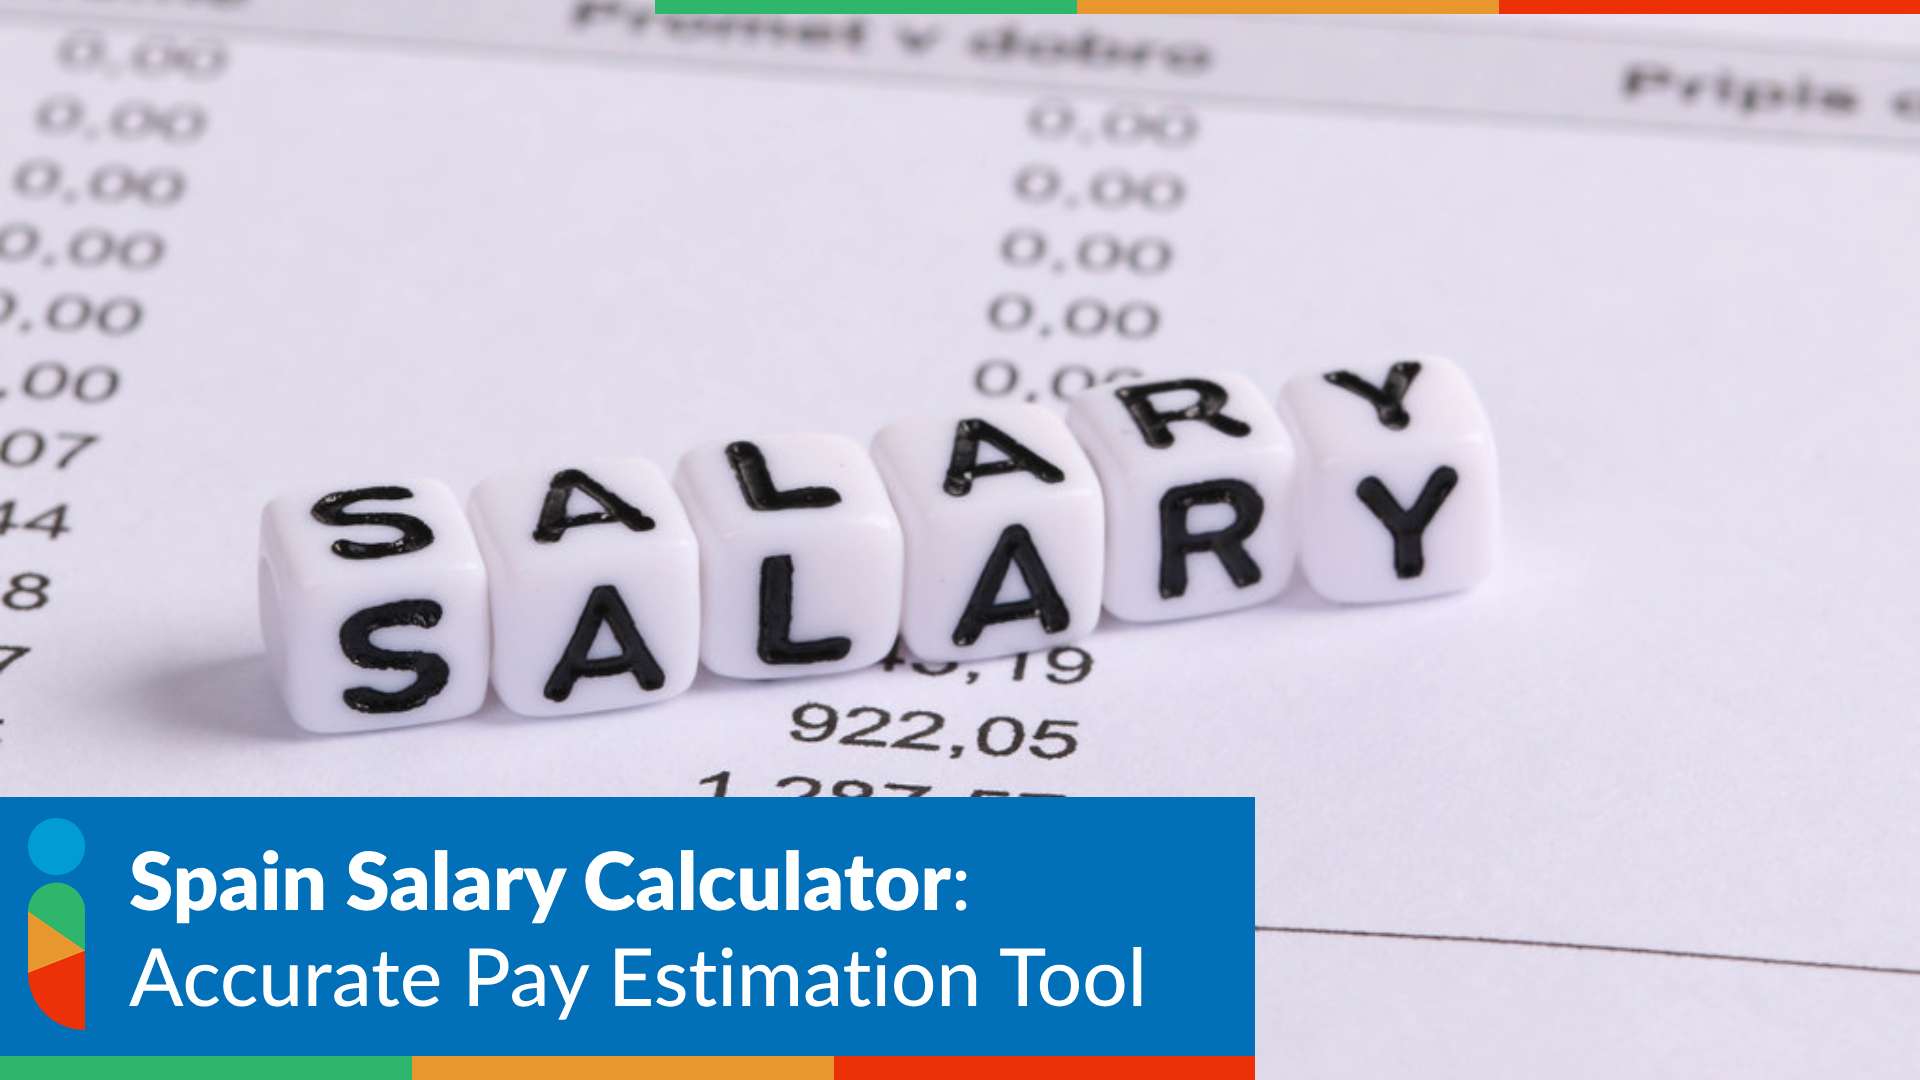 Spain Salary Calculator: Accurate Pay Estimation Tool